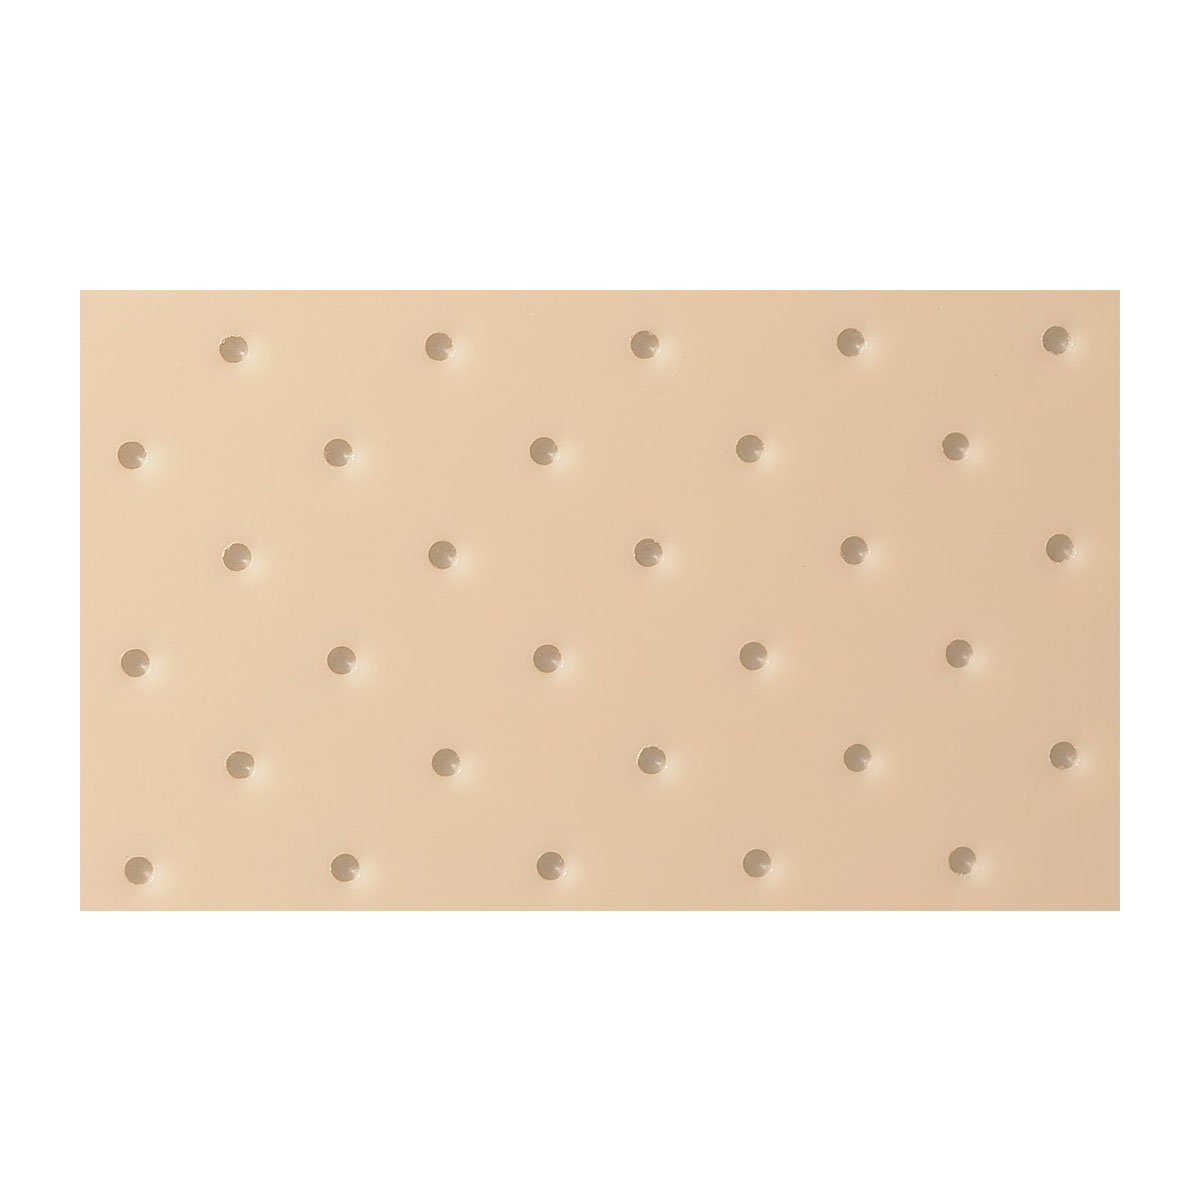 Picture of Orfit 24-5630-1 18 x 24 x 0.13 in. Classic Soft 3.5 Percent Mini Perforated Splinting Material